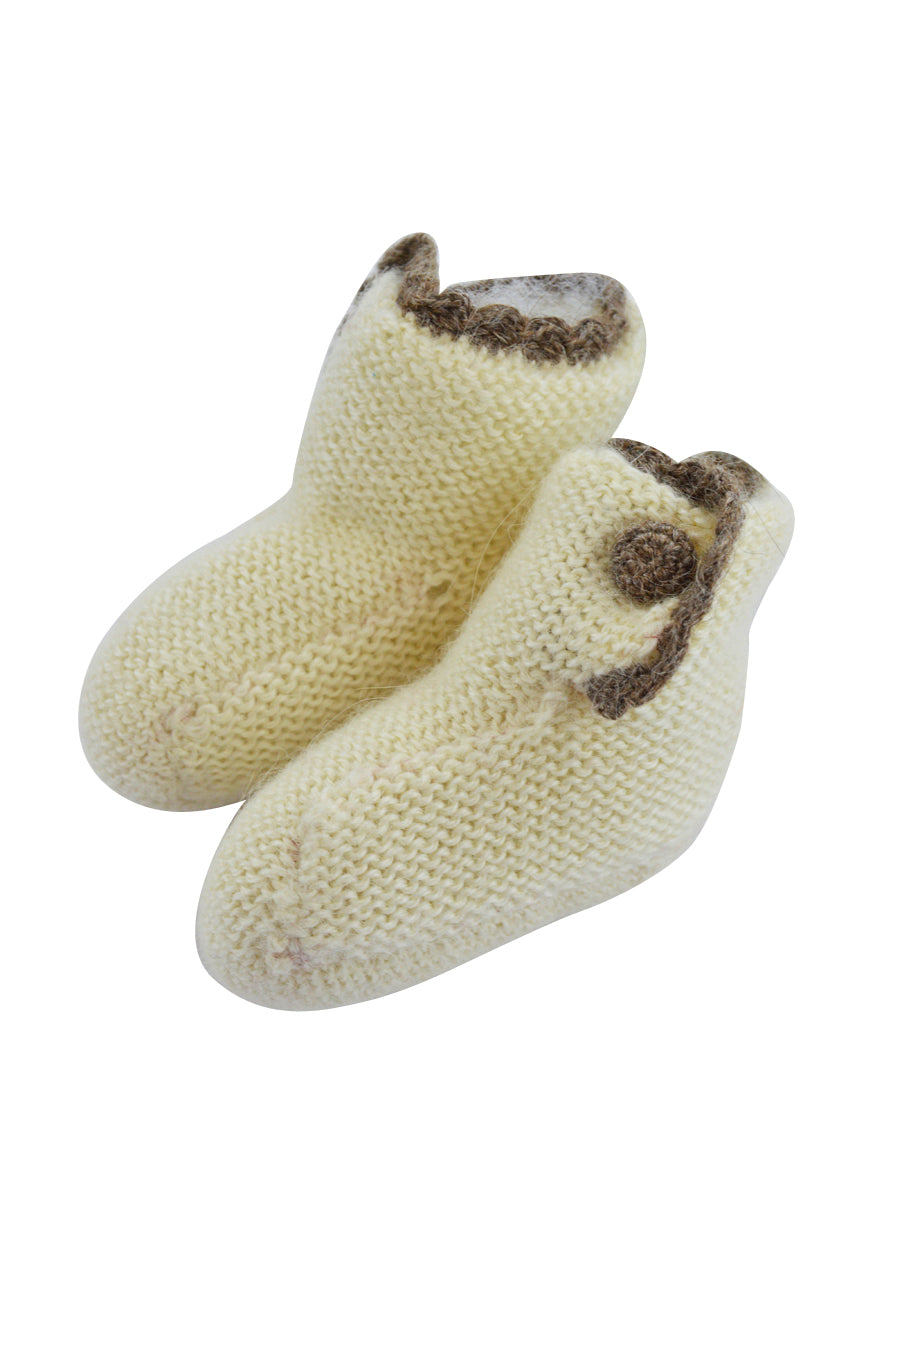 Ivory Baby Alpaca Booties with Brown Trim - Little Threads Inc. Children's Clothing